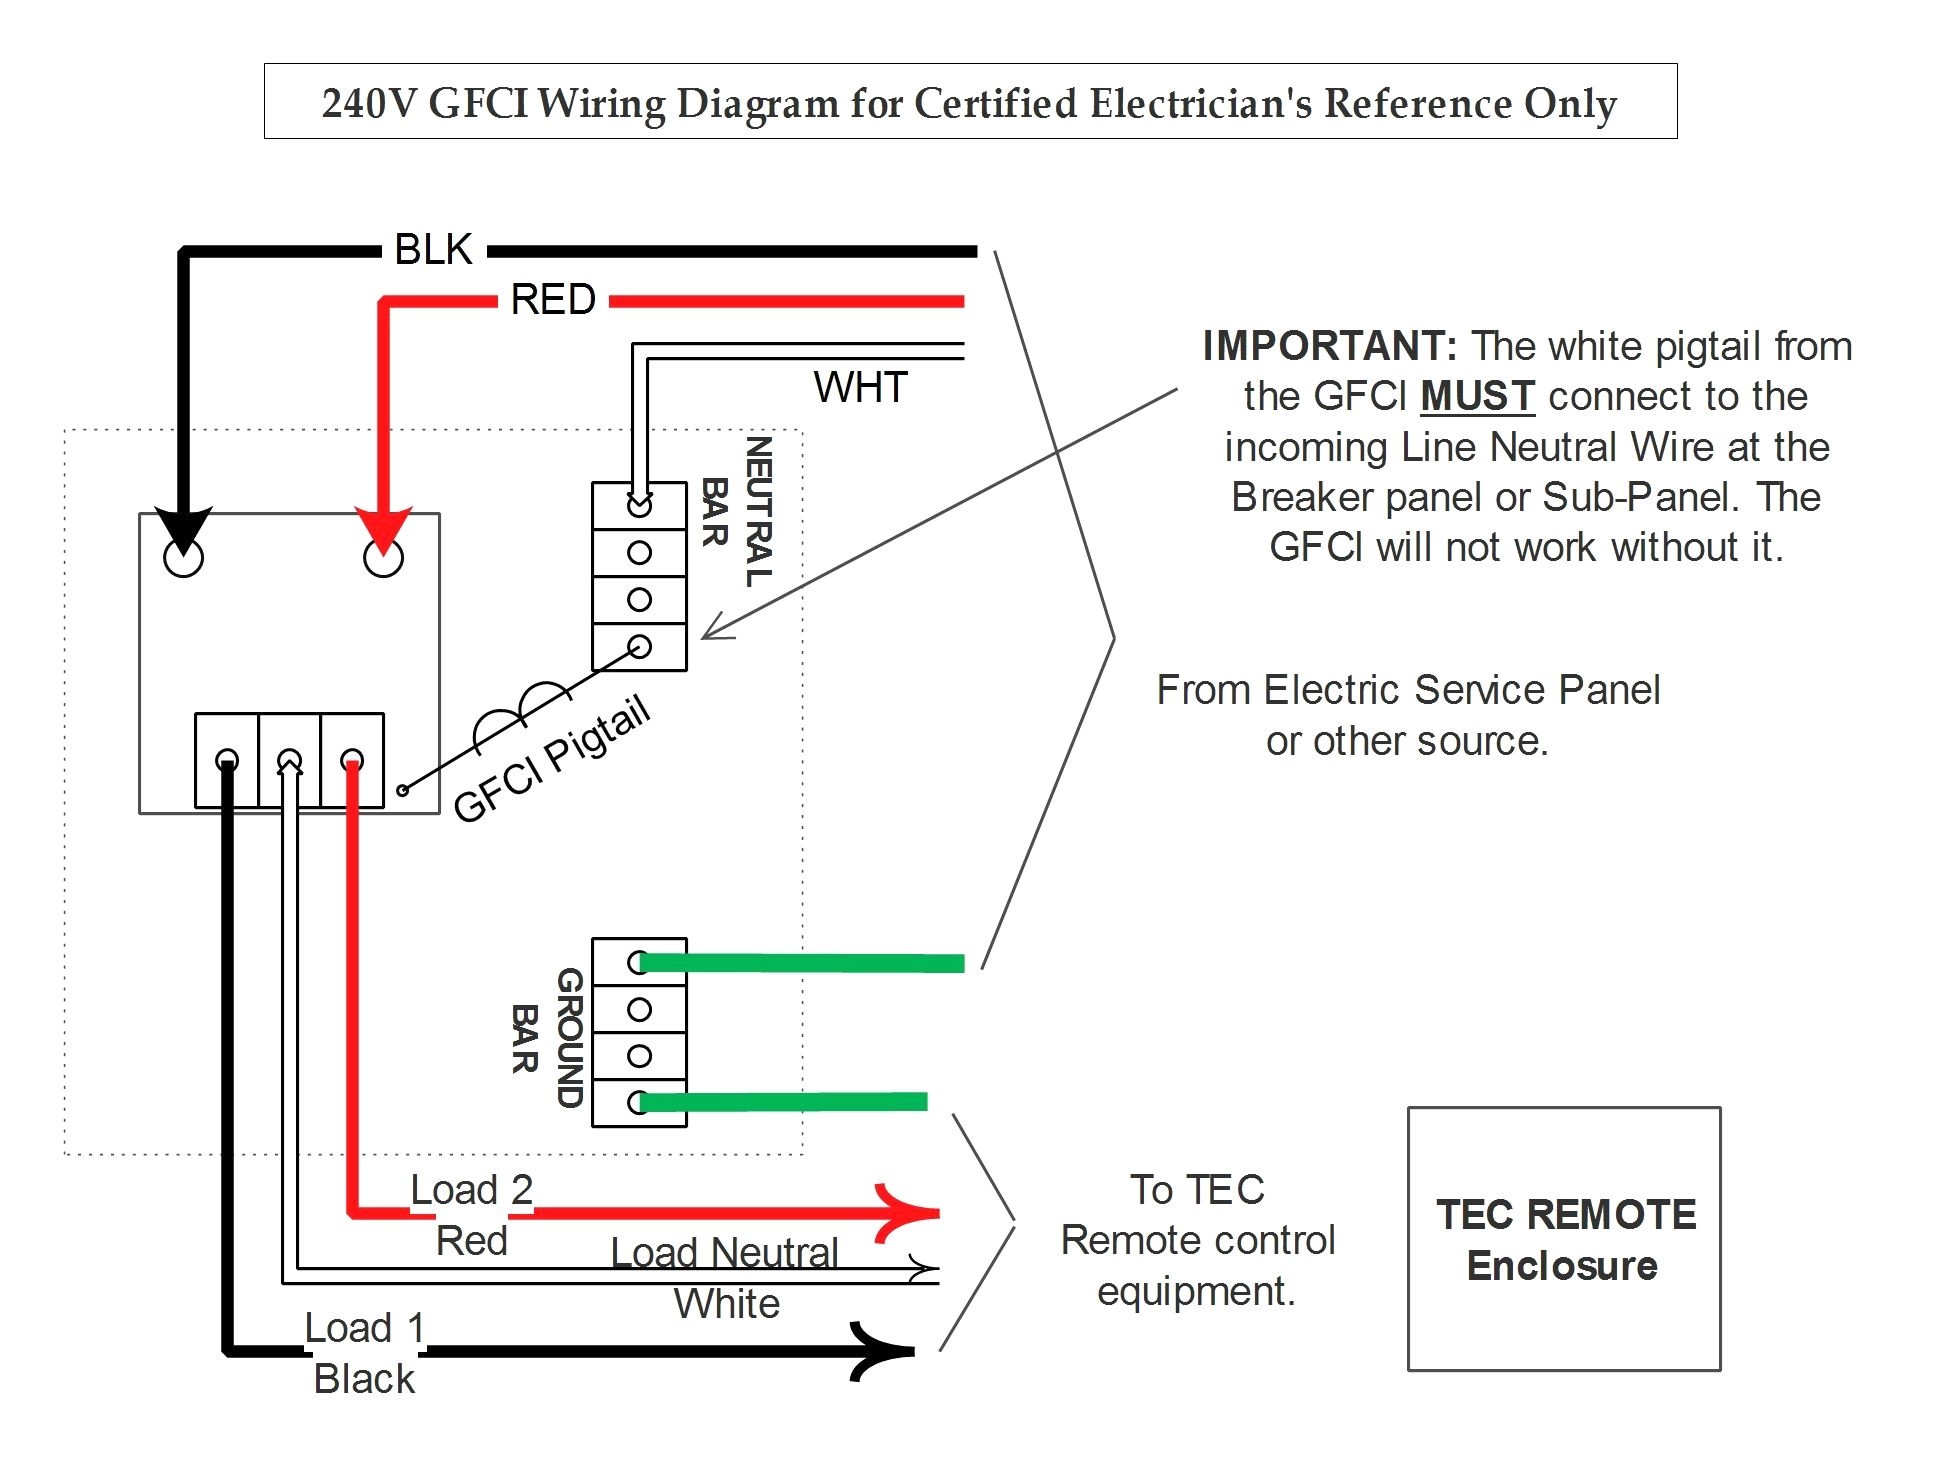 3 Position Selector Switch Wiring Diagram Rotary Switch Wiring Diagram 3 Get Free Image About Wiring Diagram Of 3 Position Selector Switch Wiring Diagram